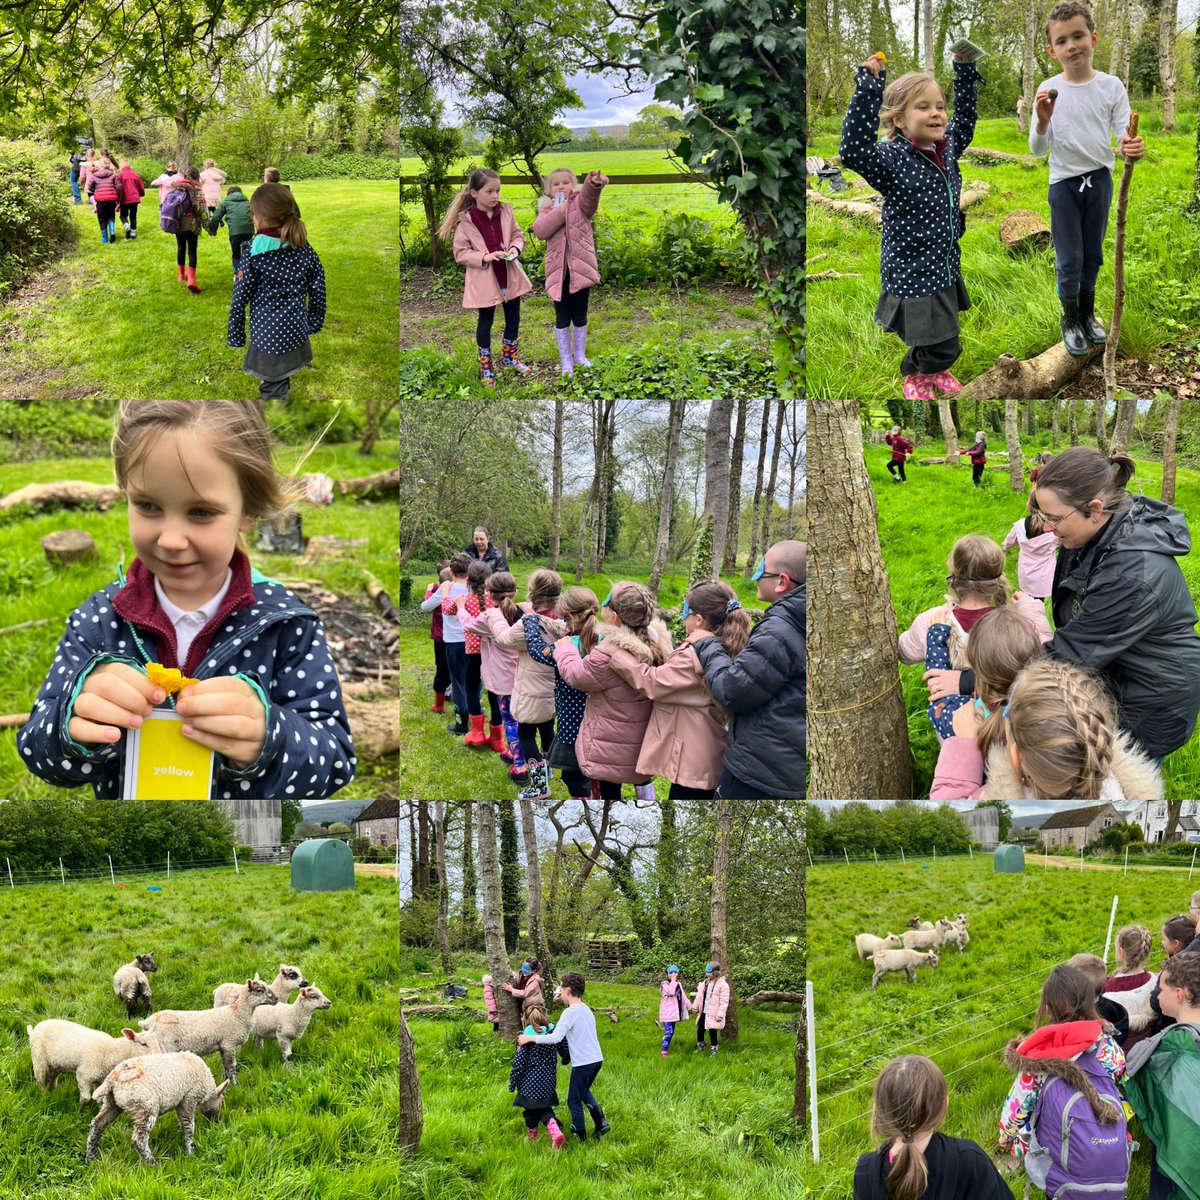 A windy but wonderful afternoon at Forest School with children from West Wick and Hewish who worked together when exploring the outside area. ‘I feel excited and nervous’. ‘I’ve never tried this before but I will have a go’. ‘I can see a pheasant, look!’ 🌿🌼